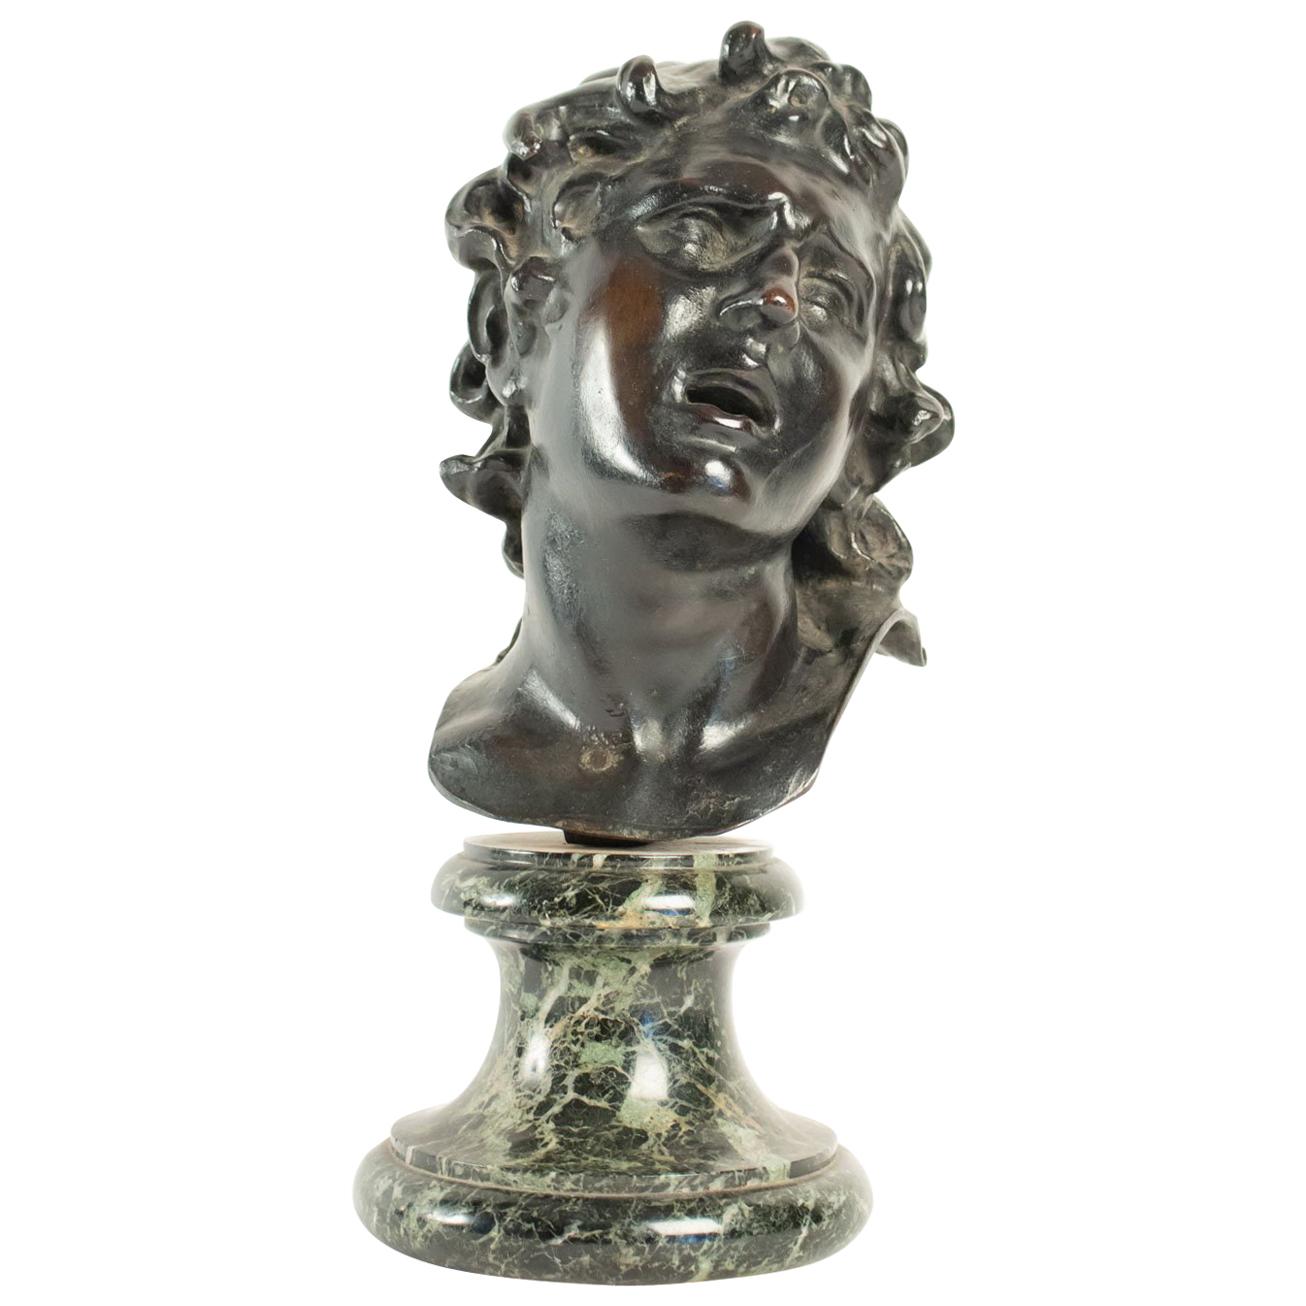 Bronze Bust with a Base of Sea Green Marble, 19th Century, Period Neoclassical